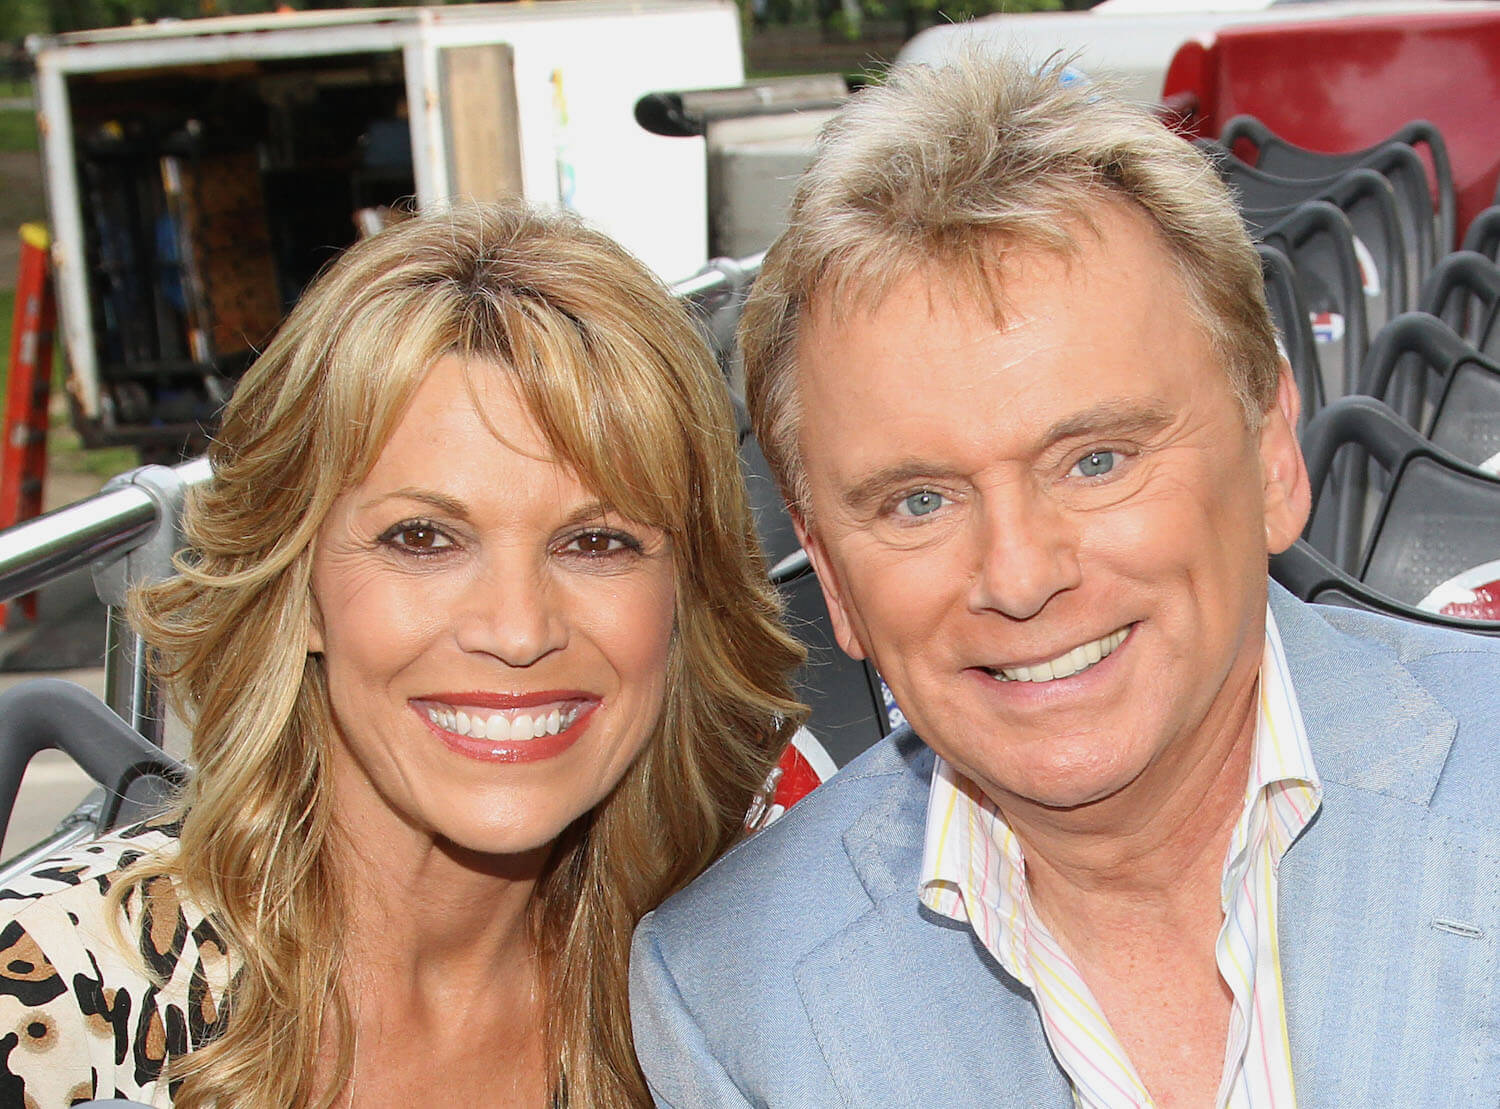 Pat Sajak and Vanna White from 'Wheel of Fortune' smiling while next to each other